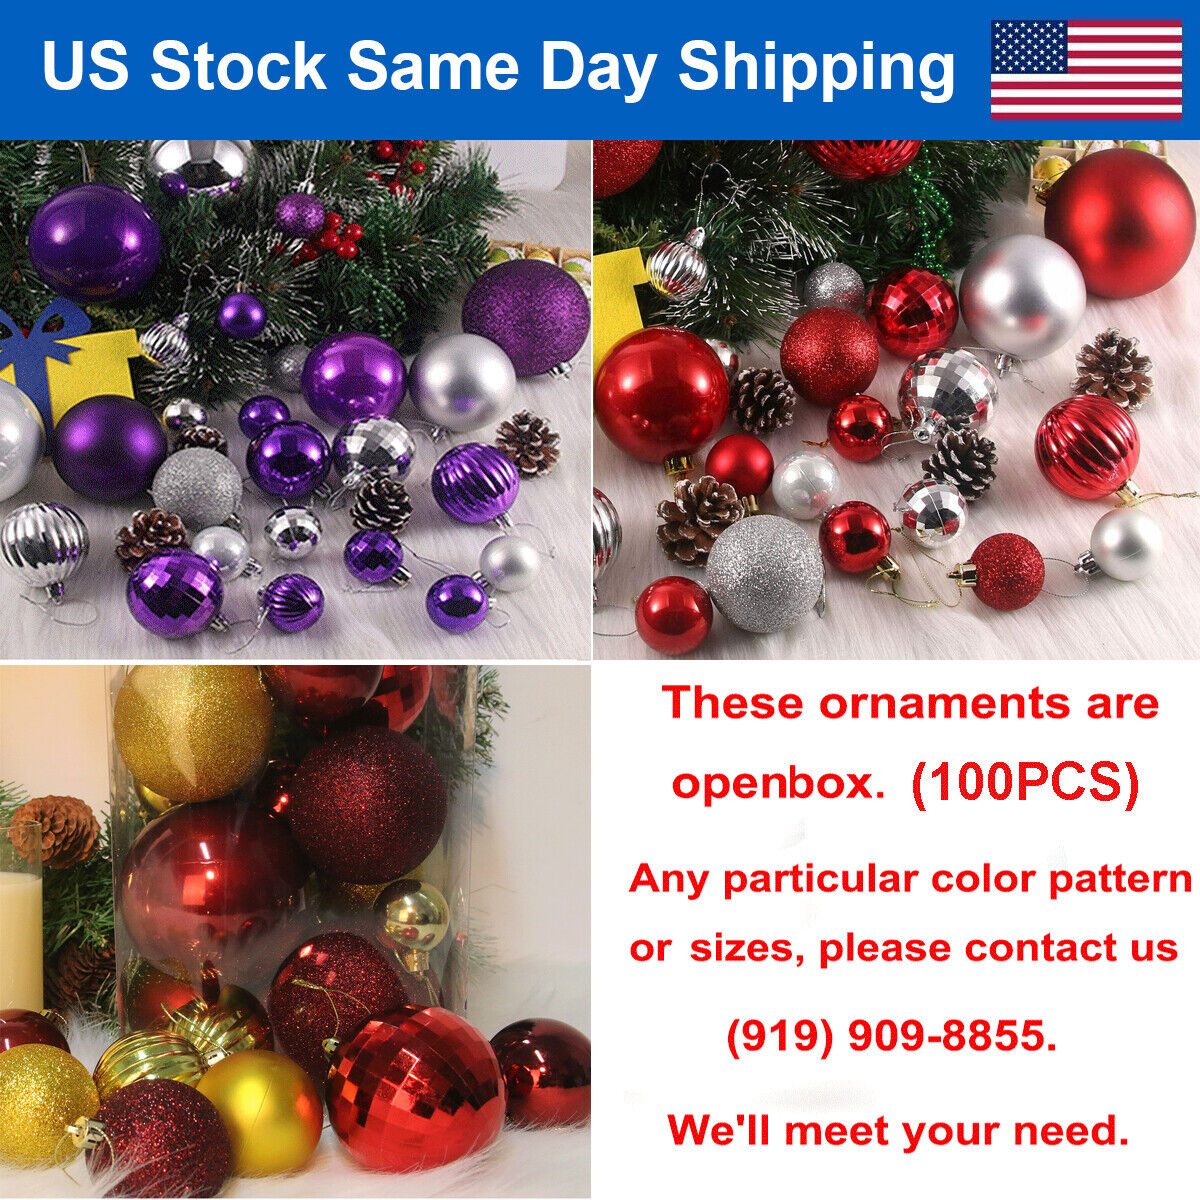 Open Box - 100Pcs Christmas Balls Ornaments In/Outdoor Hanging Ball Tree Decor TQS Does Not Apply